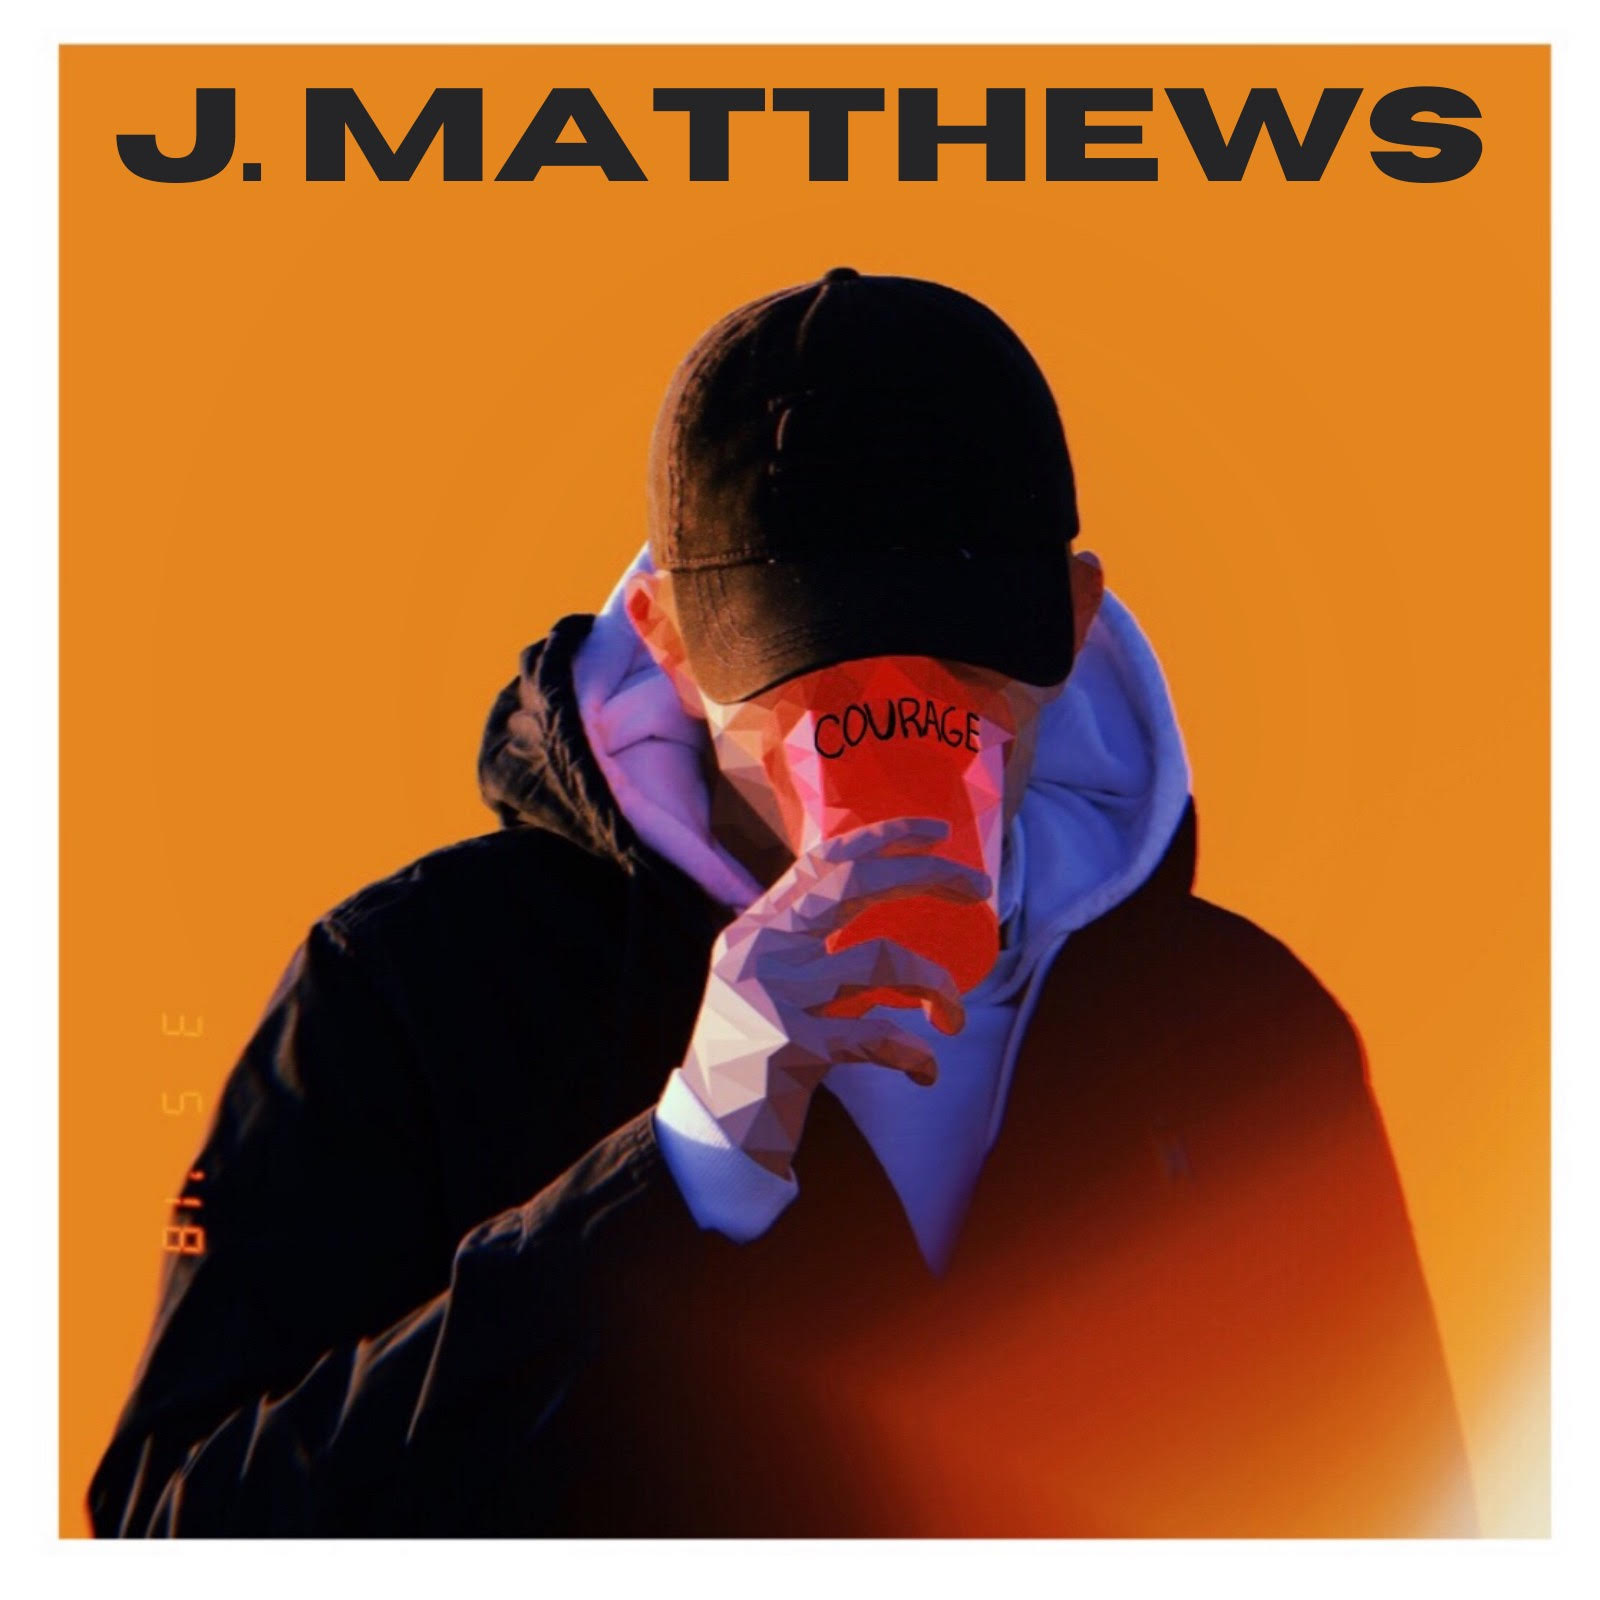 Artwork for the EP ‘Courage’ by J. Matthews